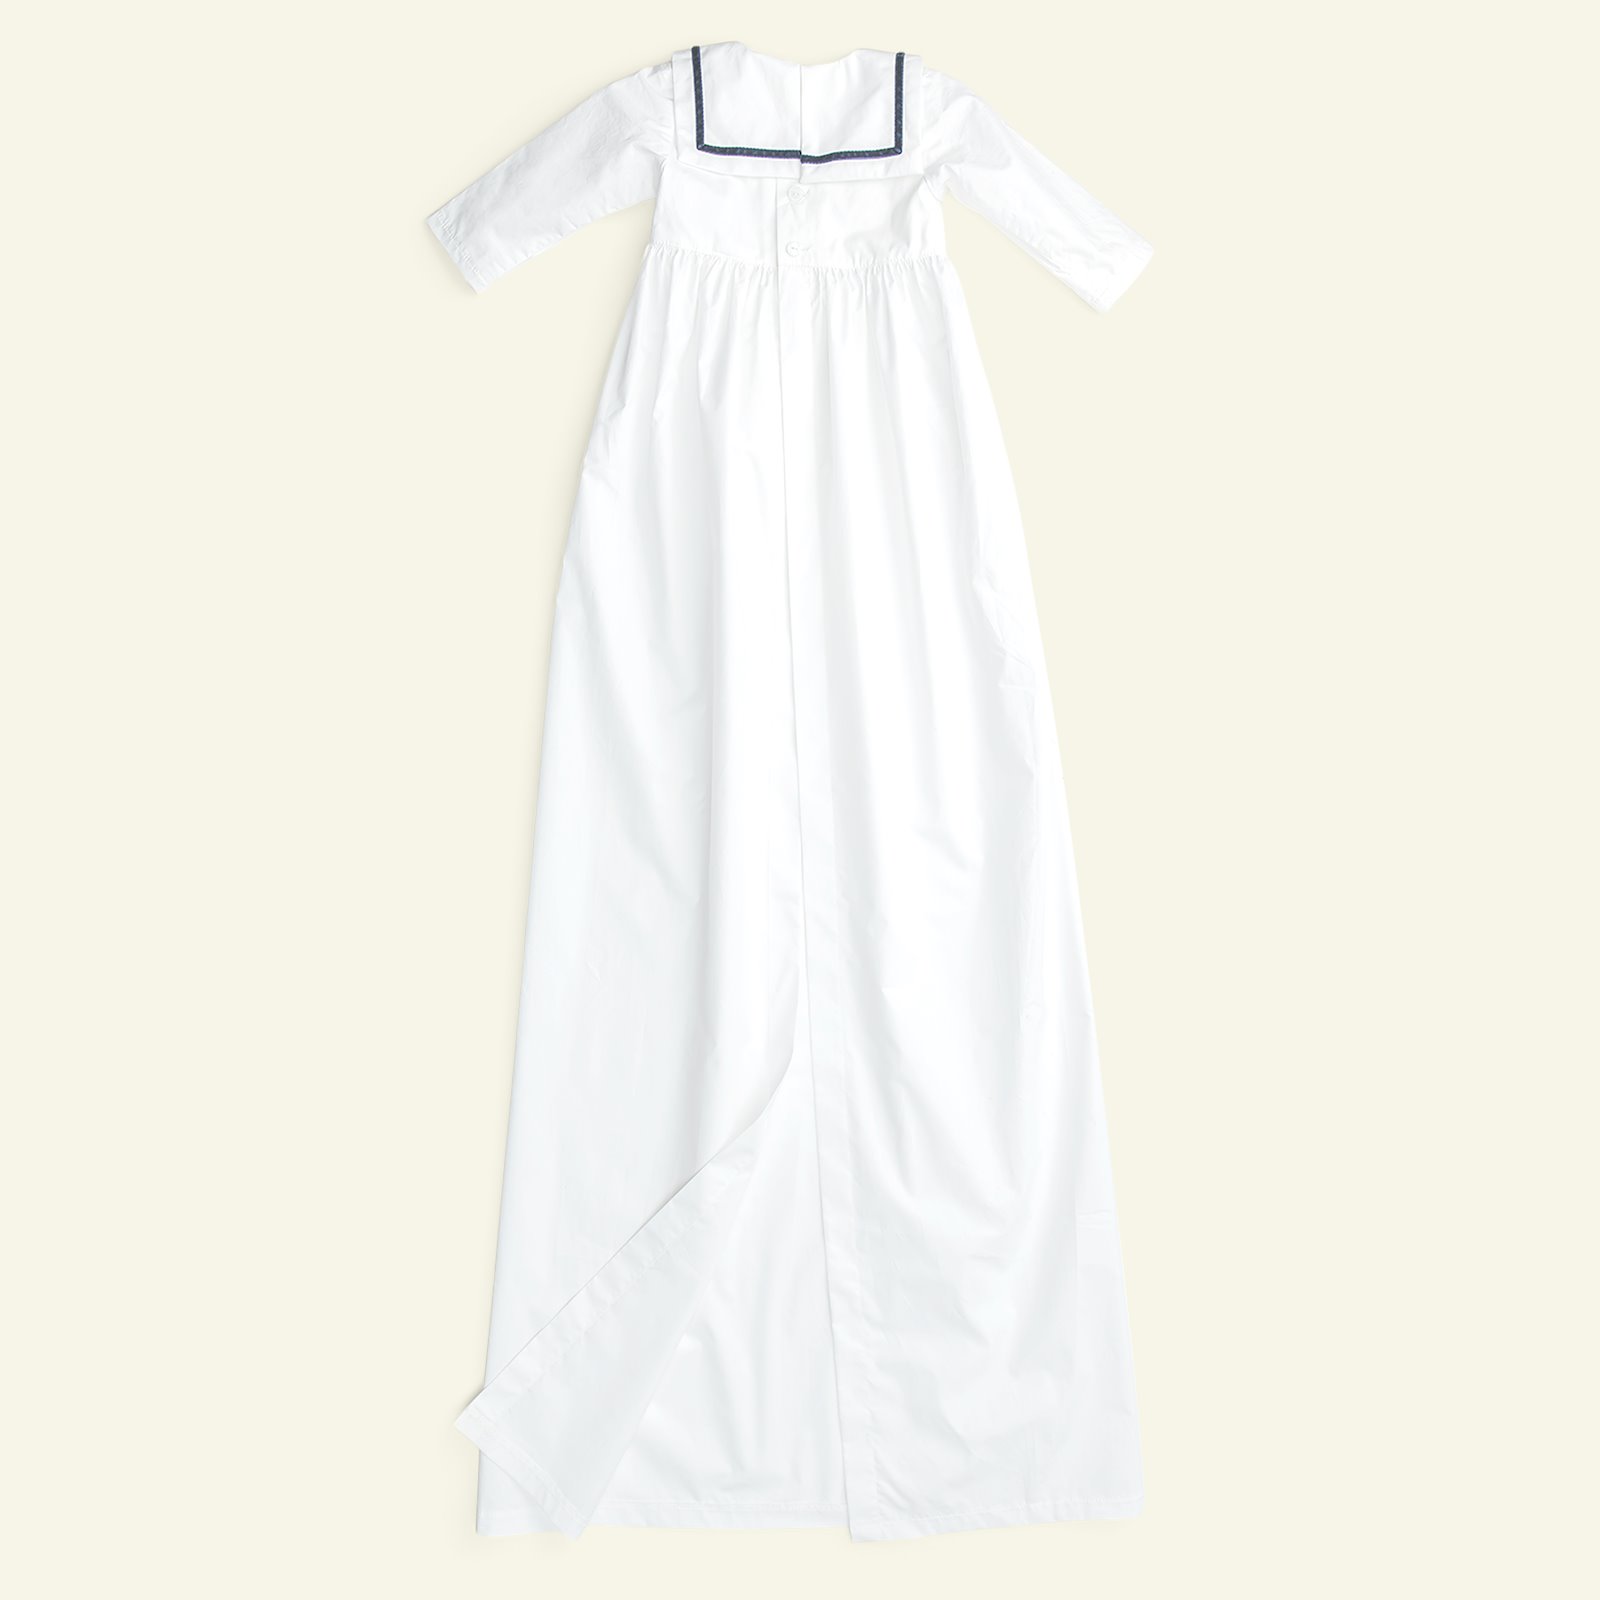 Own designed christening gown 62/68 - 74/80 p83018_26023_540111_pack_b